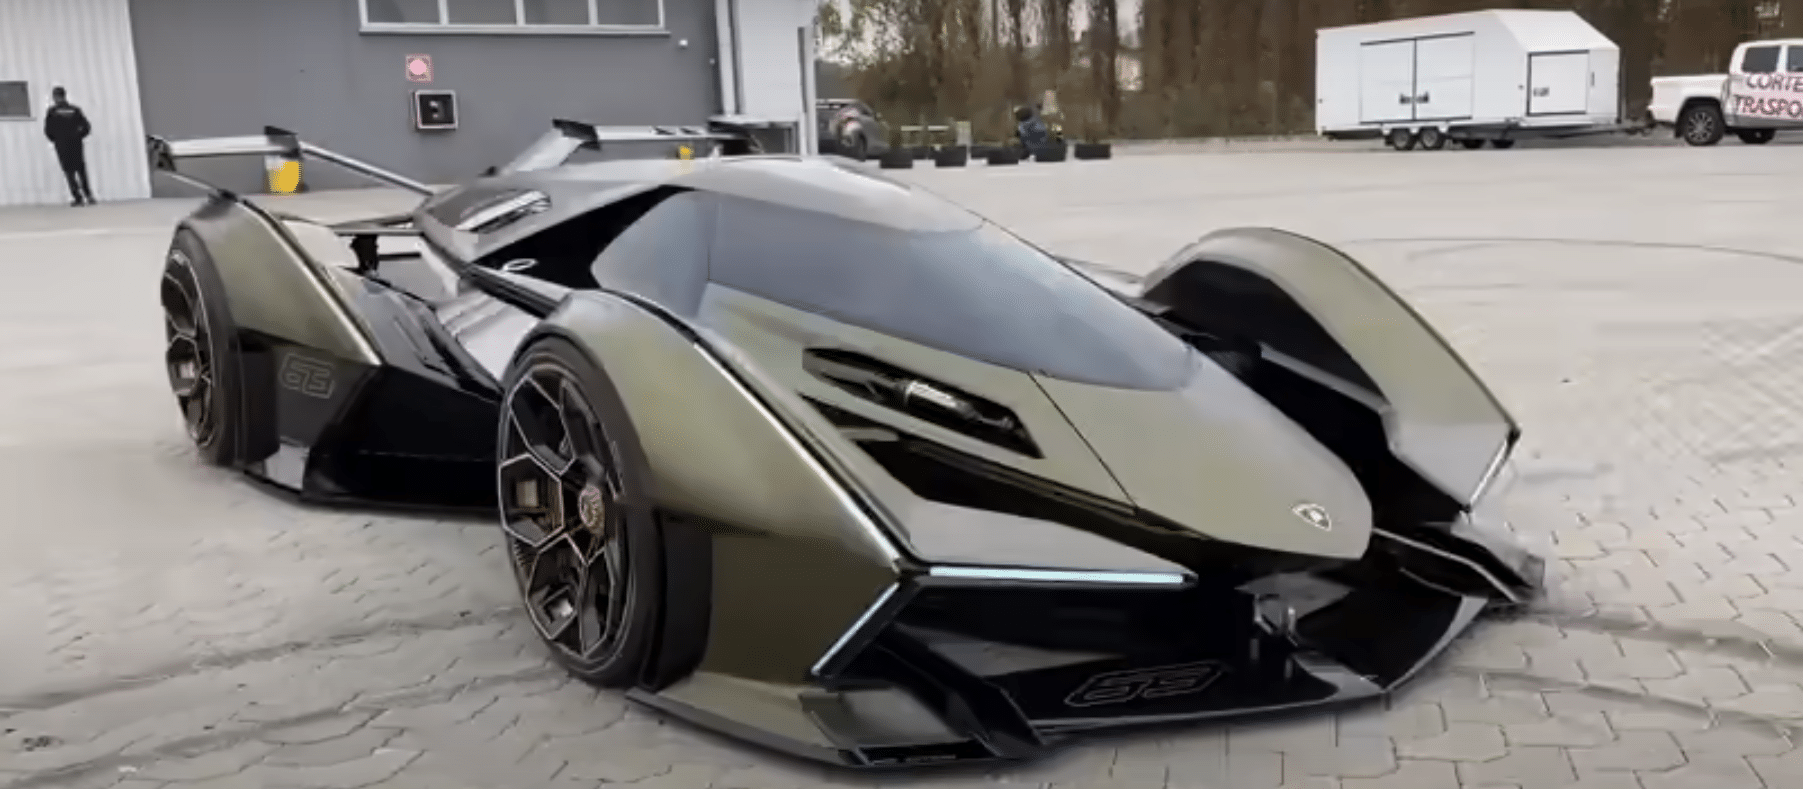 Is this the world’s wildest car? A look at the Lamborghini Vision Gran Turismo